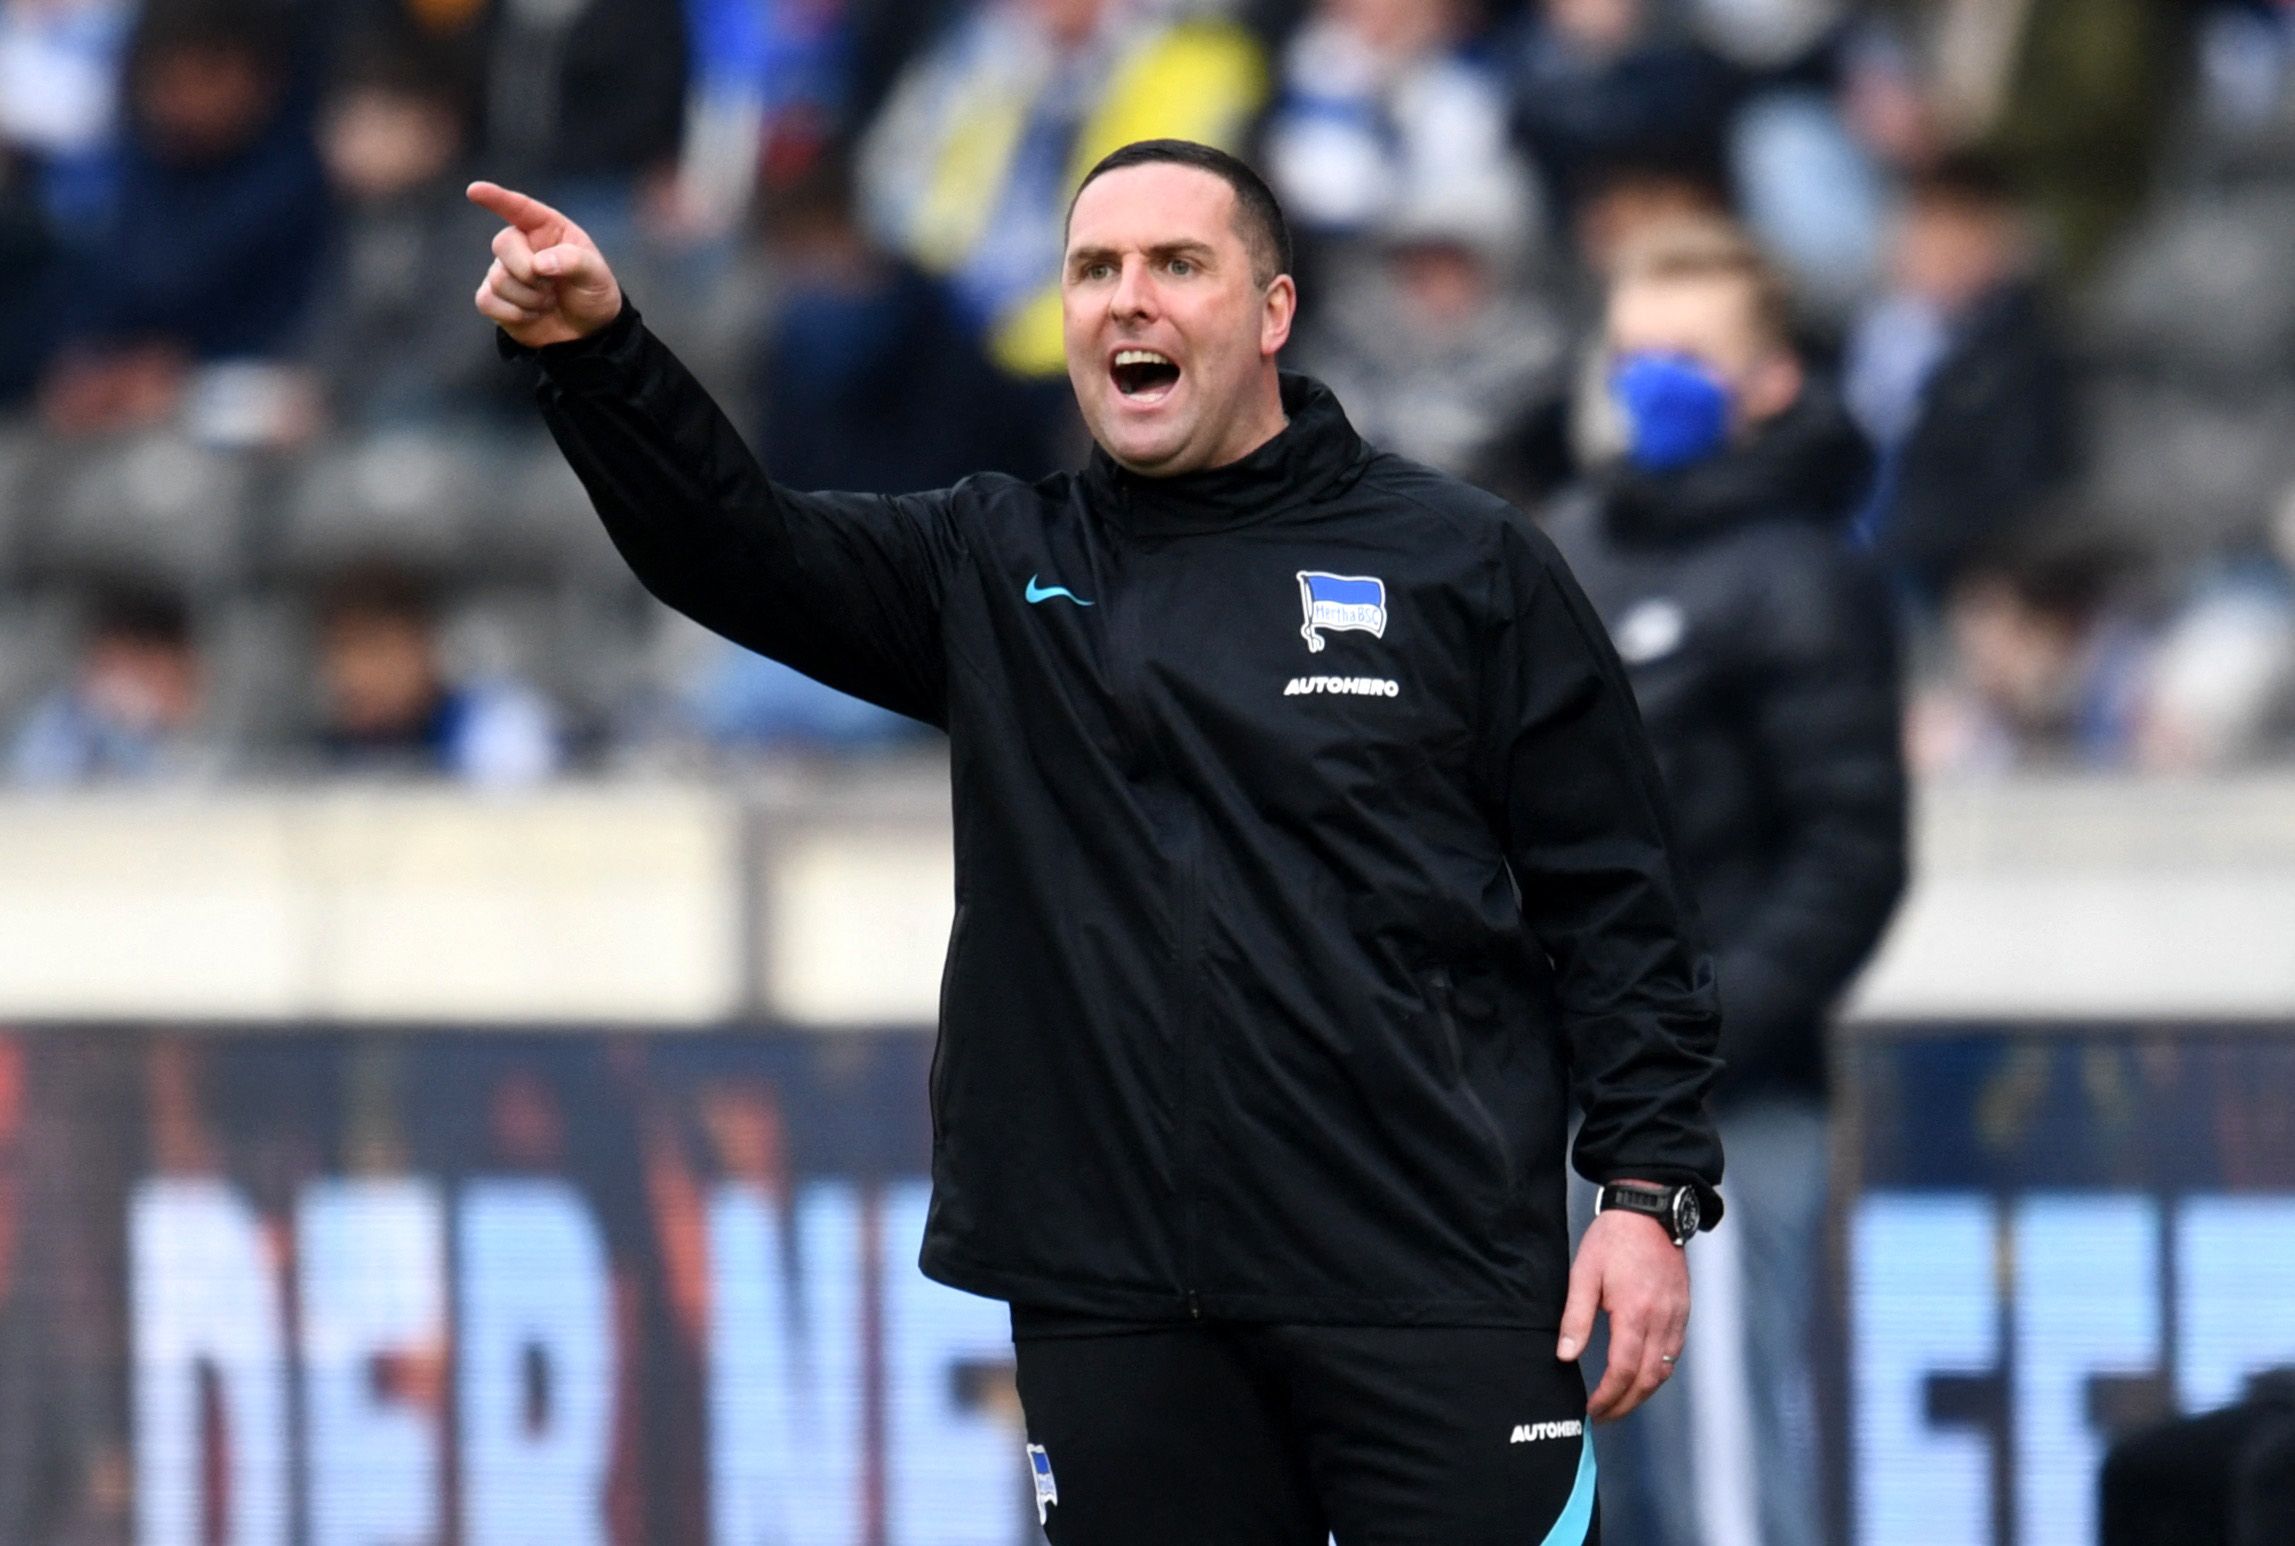 Soccer Football - Bundesliga - Hertha BSC v TSG 1899 Hoffenheim - Olympiastadion, Berlin, Germany - March 19, 2022 Hertha BSC assistant coach Mark Fotheringham reacts REUTERS/Annegret Hilse DFL REGULATIONS PROHIBIT ANY USE OF PHOTOGRAPHS AS IMAGE SEQUENCES AND/OR QUASI-VIDEO.